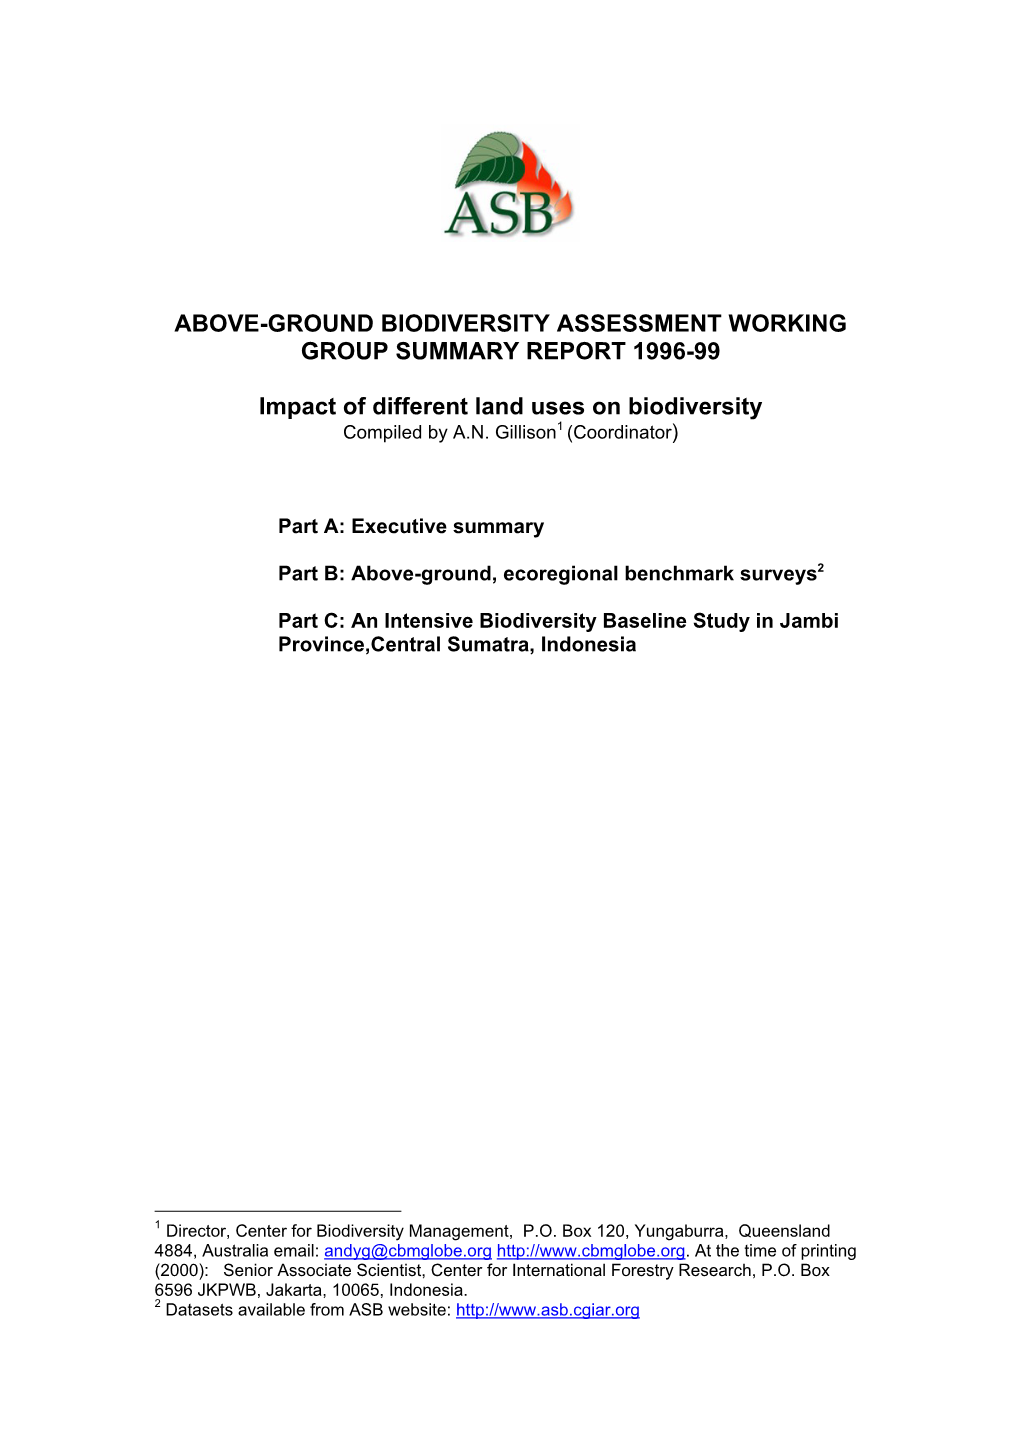 Above-Ground Biodiversity Assessment Working Group Summary Report 1996-99